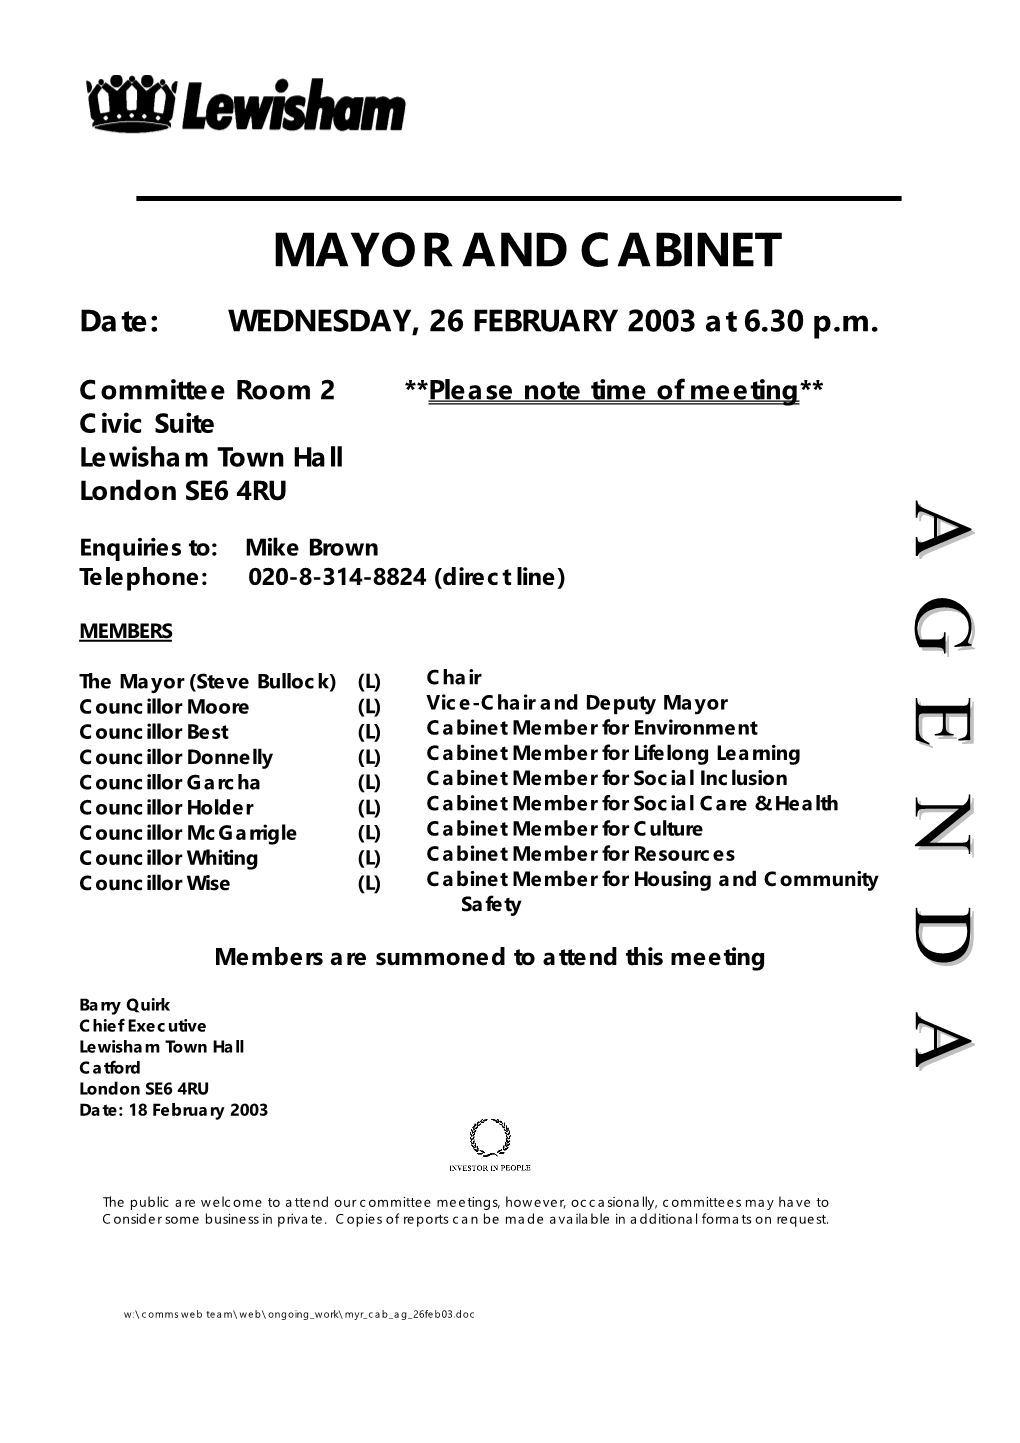 MAYOR and CABINET Date: WEDNESDAY, 26 FEBRUARY 2003 at 6.30 P.M